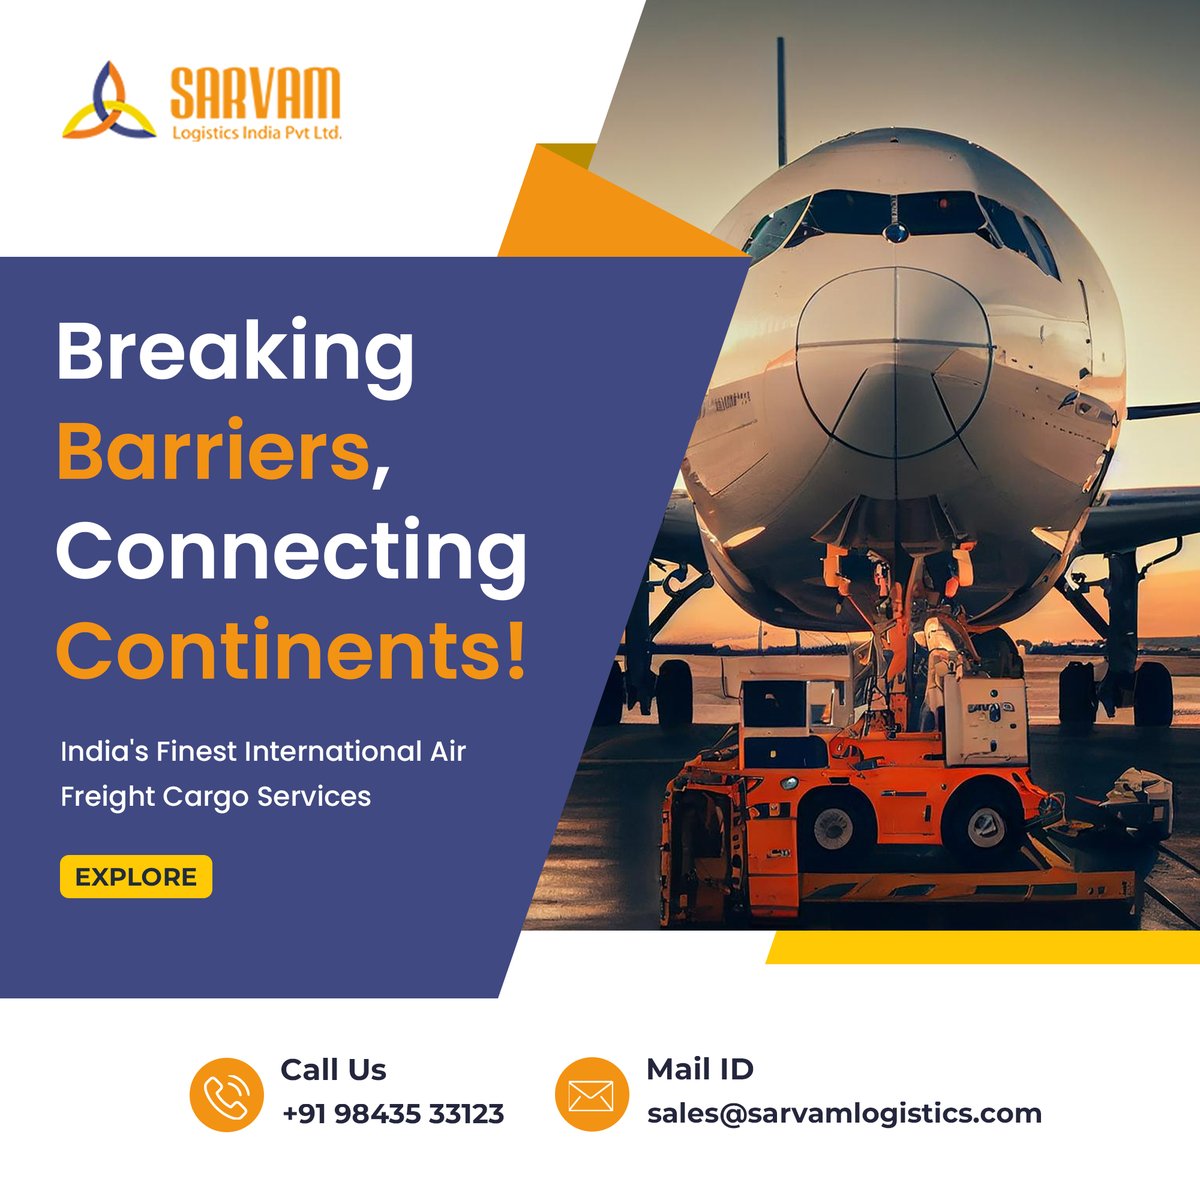 Breaking barriers and connecting continents, we take pride in offering India's finest International Air Freight Cargo Services. 

🔗 sarvamlogistics.com/air-cargo-serv…

Follow us @SarvamLogistics

#AirFreightExcellence #GlobalLogistics #CargoConnections #SarvamLogistics #Logistics